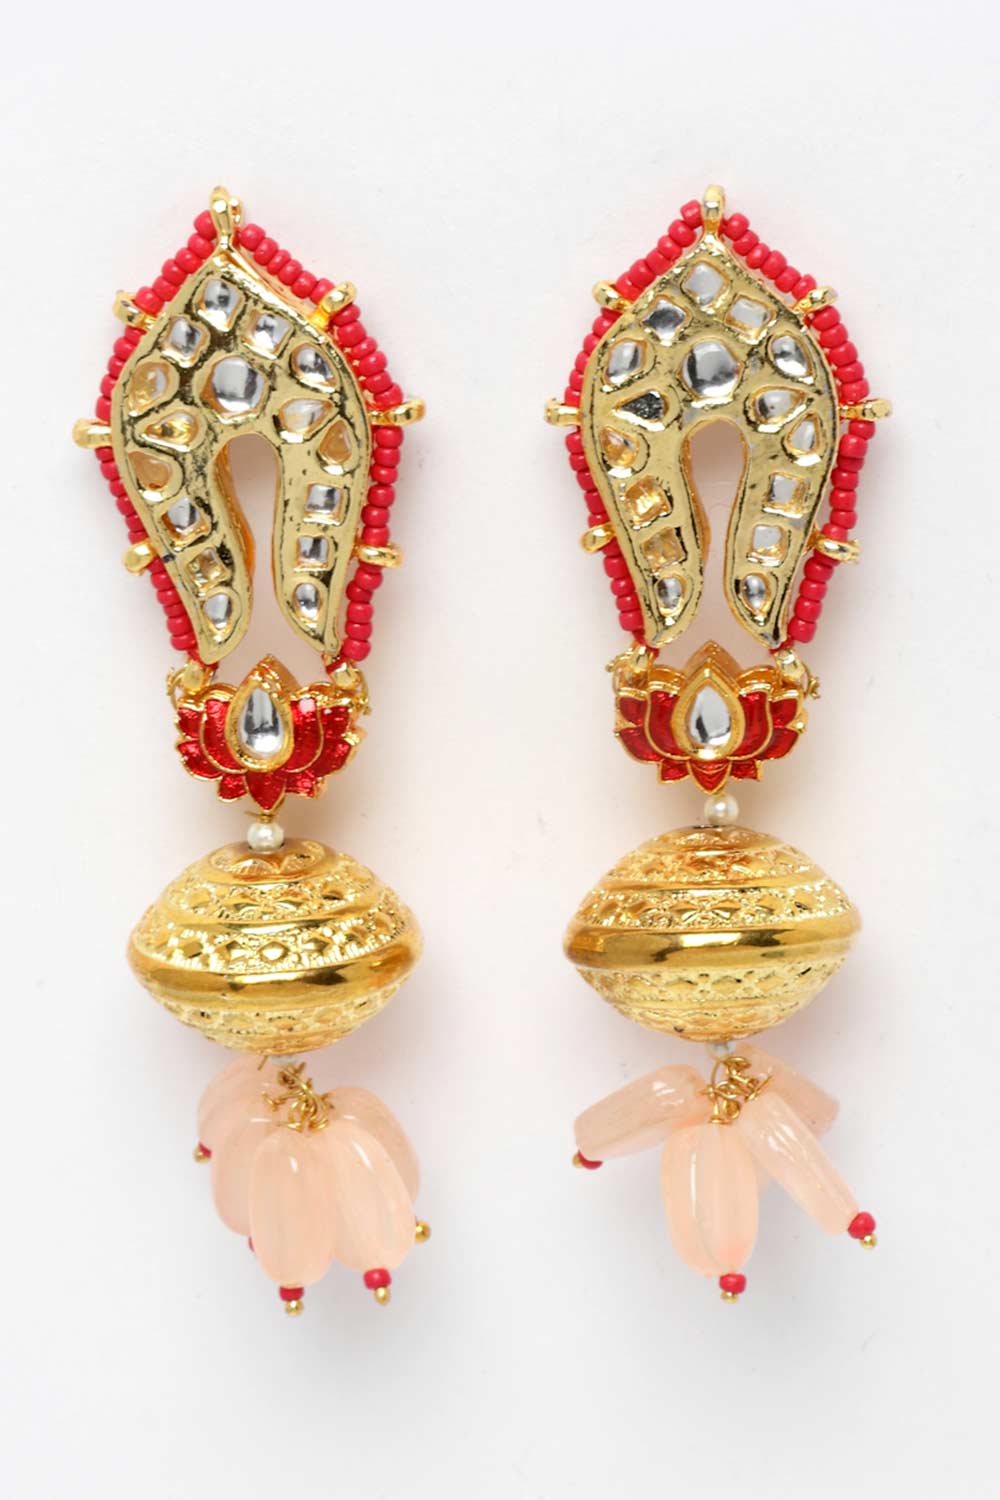 Shop Deepal Pink & Red Gold-Plated Kundan withPearls Chandbali Earrings at best offer at our  Store - One Minute Saree